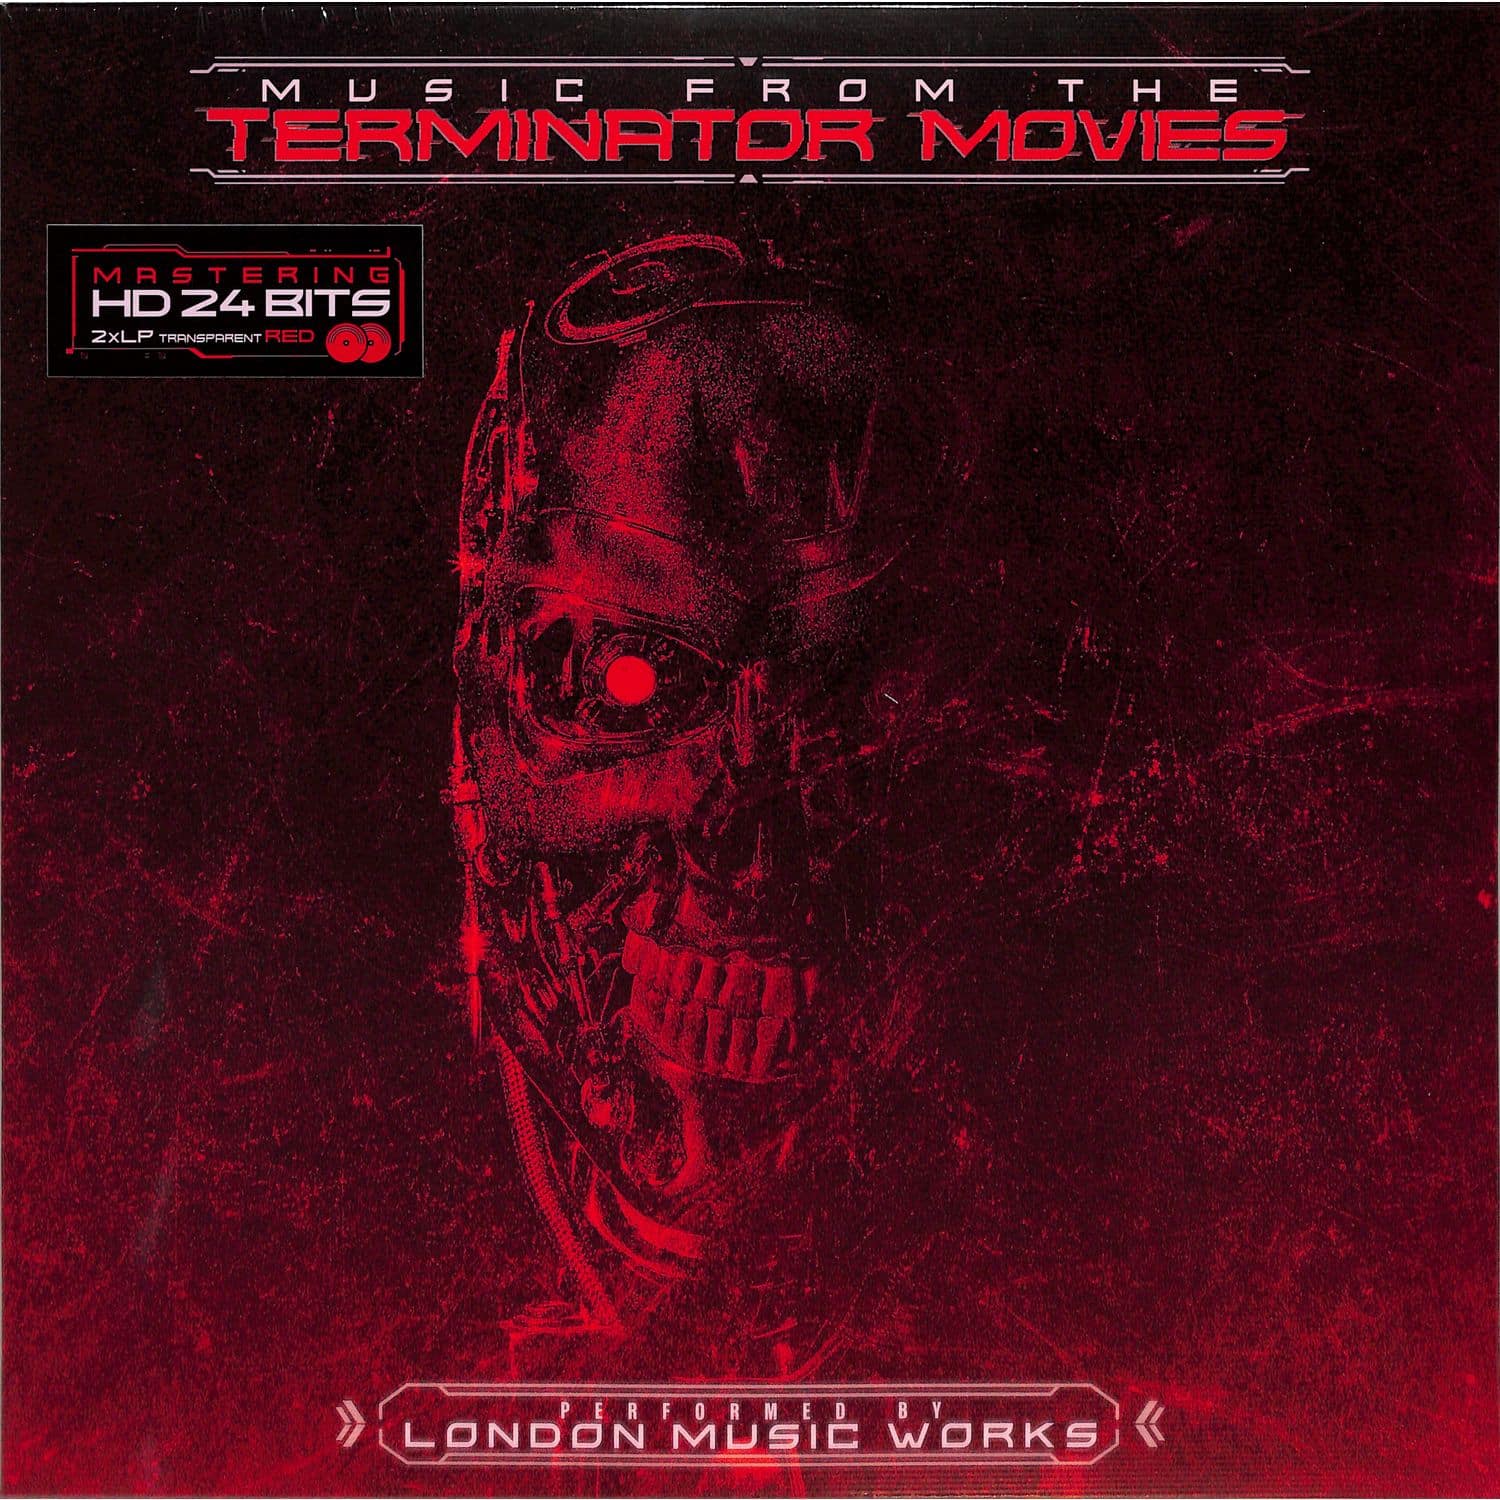 London Music Works - MUSIC FROM THE TERMINATOR MOVIES 